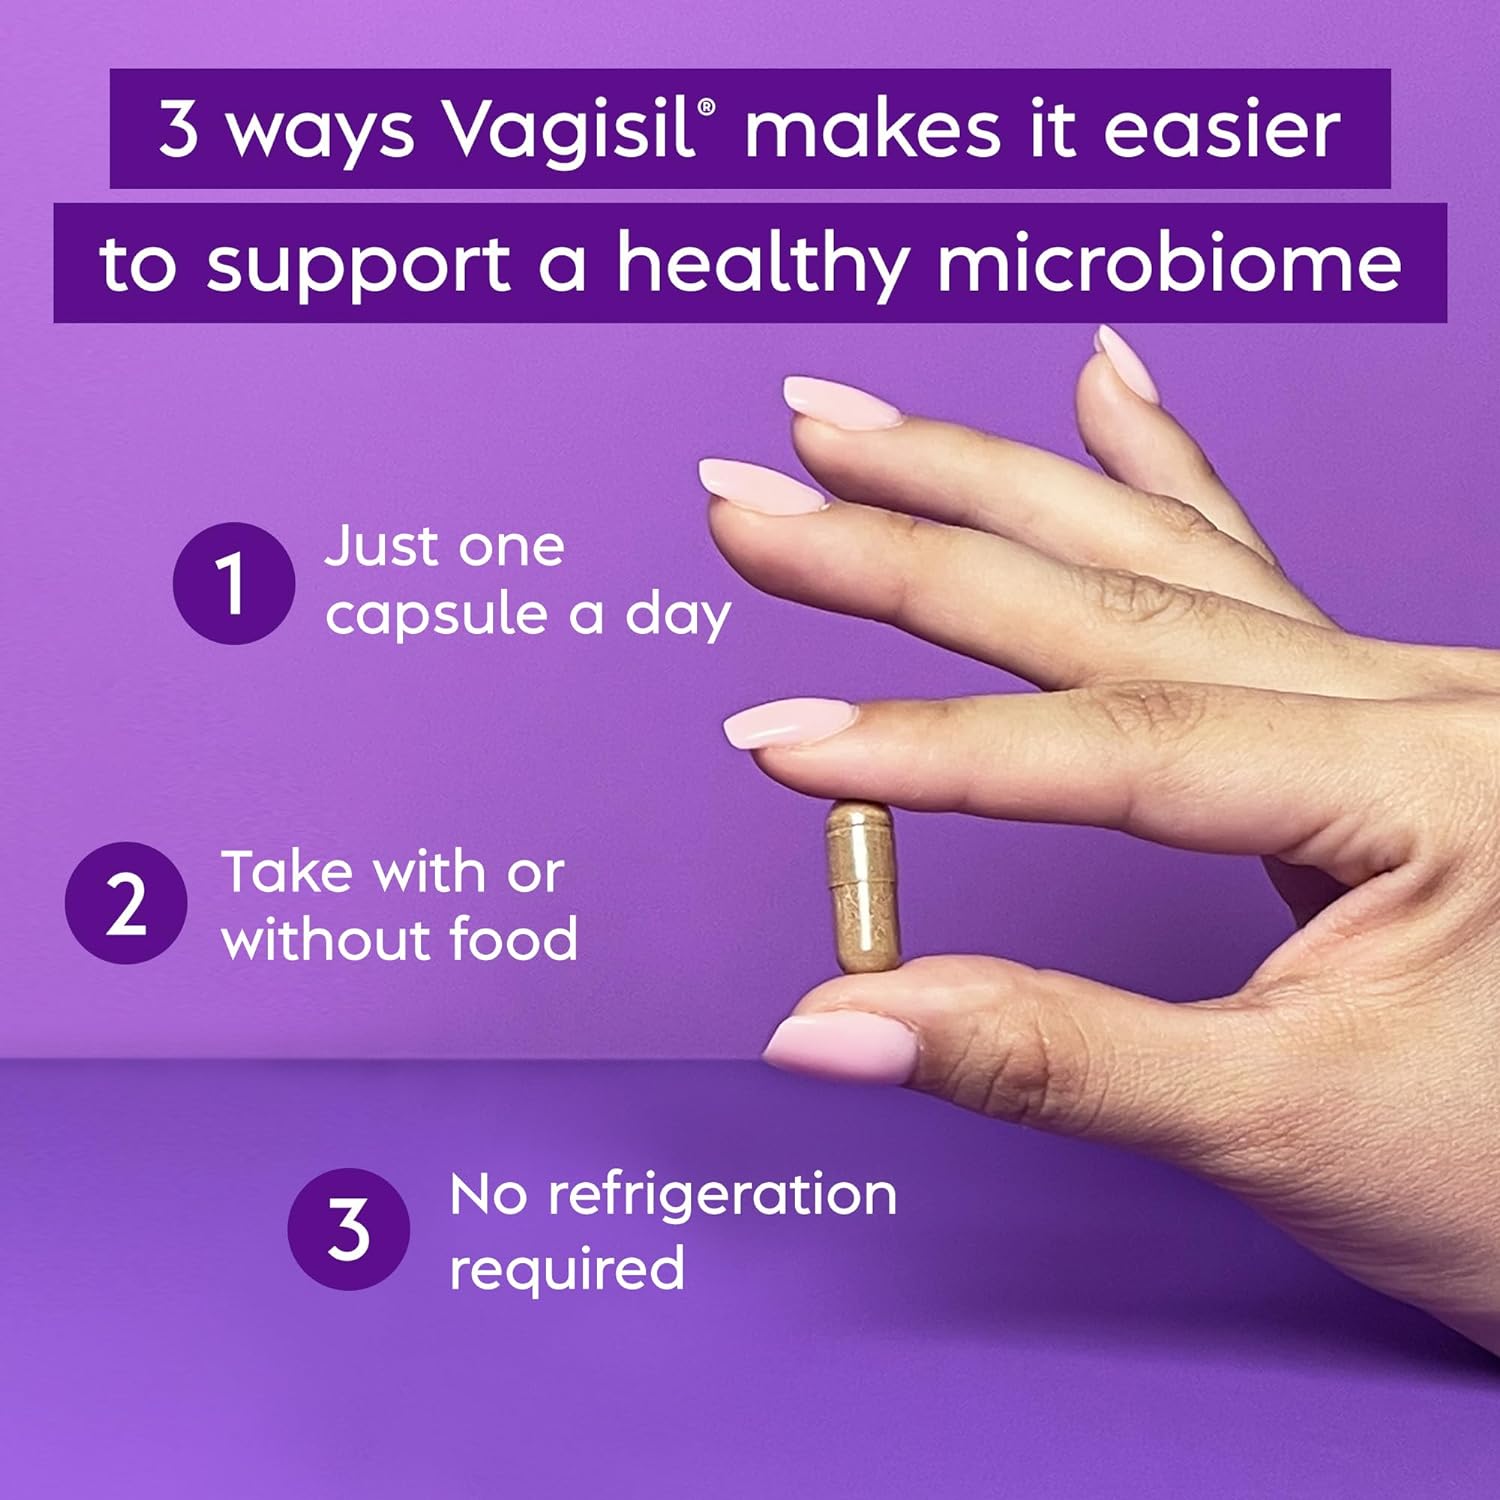 Vagisil Yeast Defense Supplements, Helps Balance Yeast and Good Bacteria, Clinically-Proven Probiotics, Clean Ingredients, Promotes A Healthy Vaginal Microbiome, Just 1 Capsule Daily, 30 Capsules : Health & Household